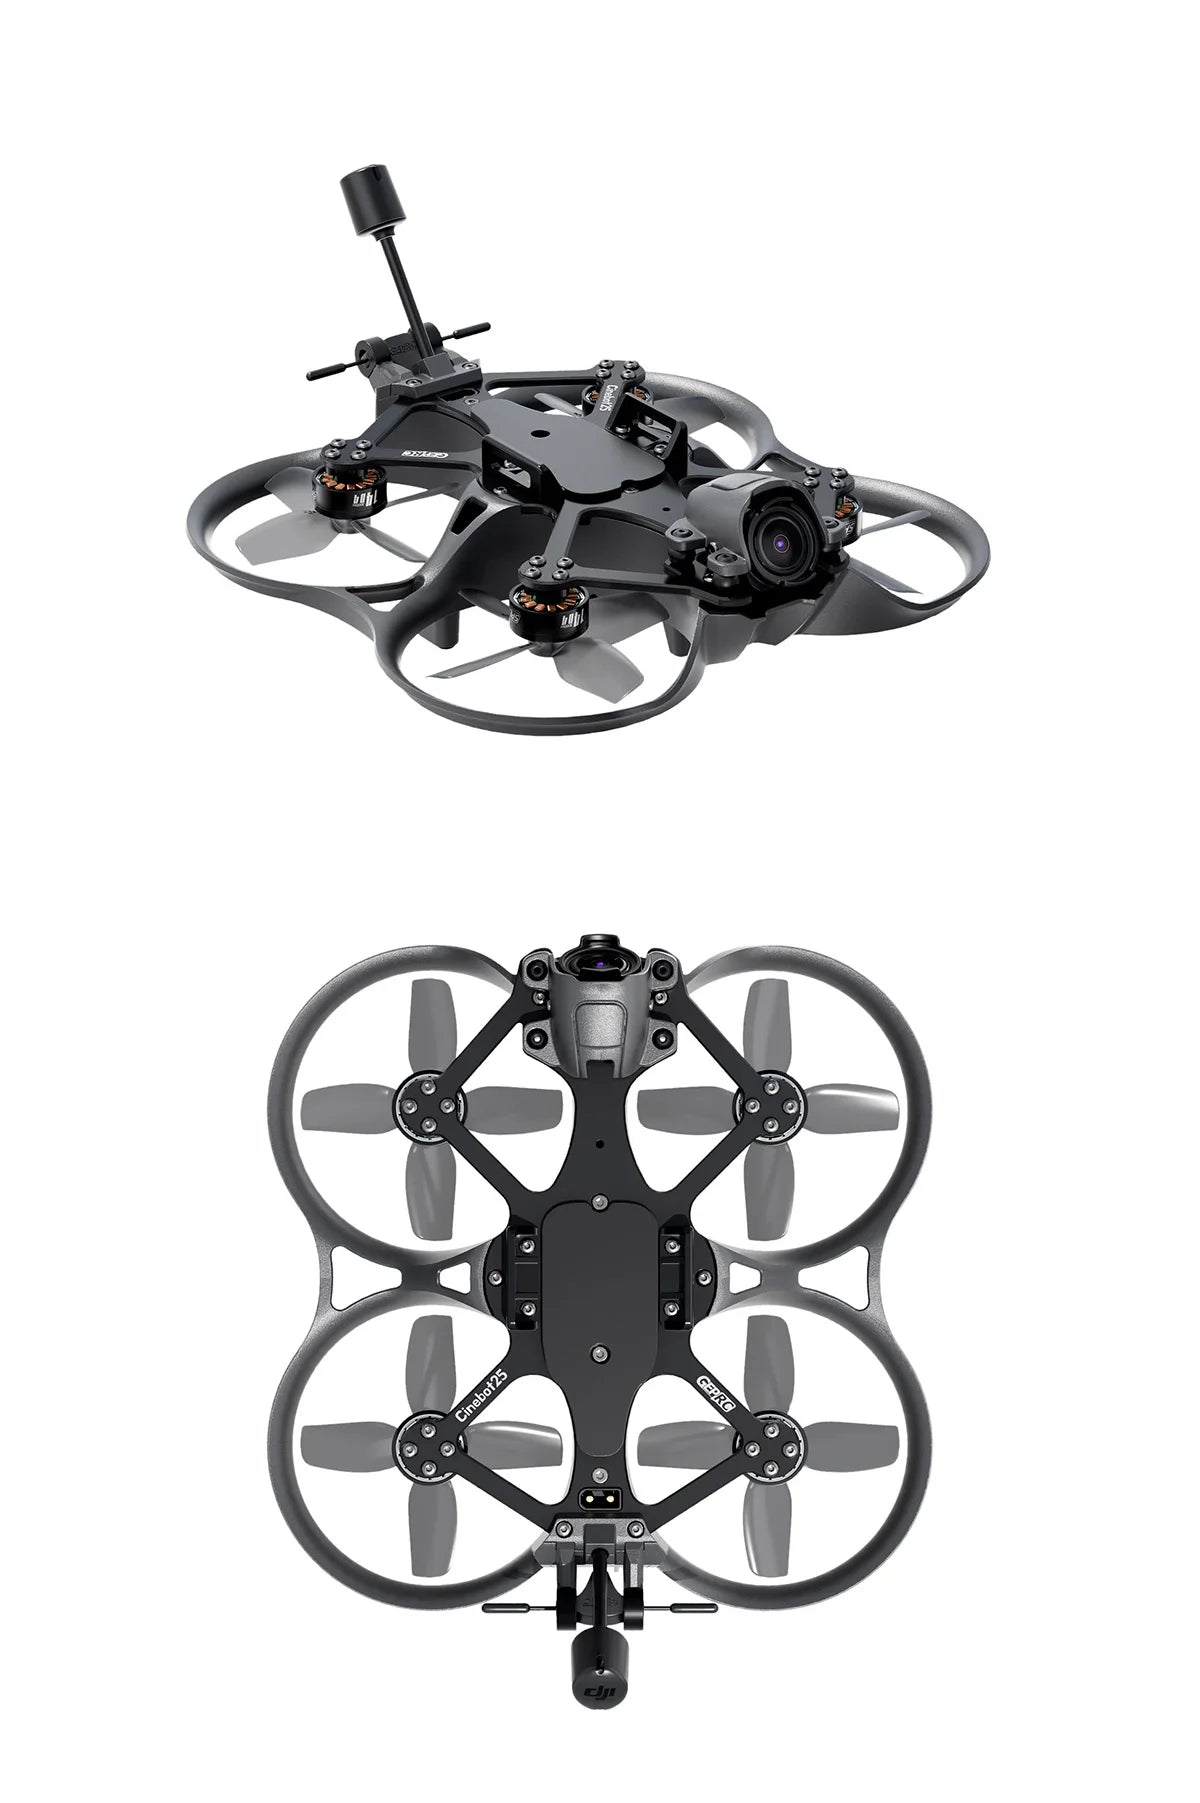 GEPRC Cinebot25 S WTFPV 2.5inch FPV Drone, the regular version with the SPEEDX2 1404 motor and the S(sport)